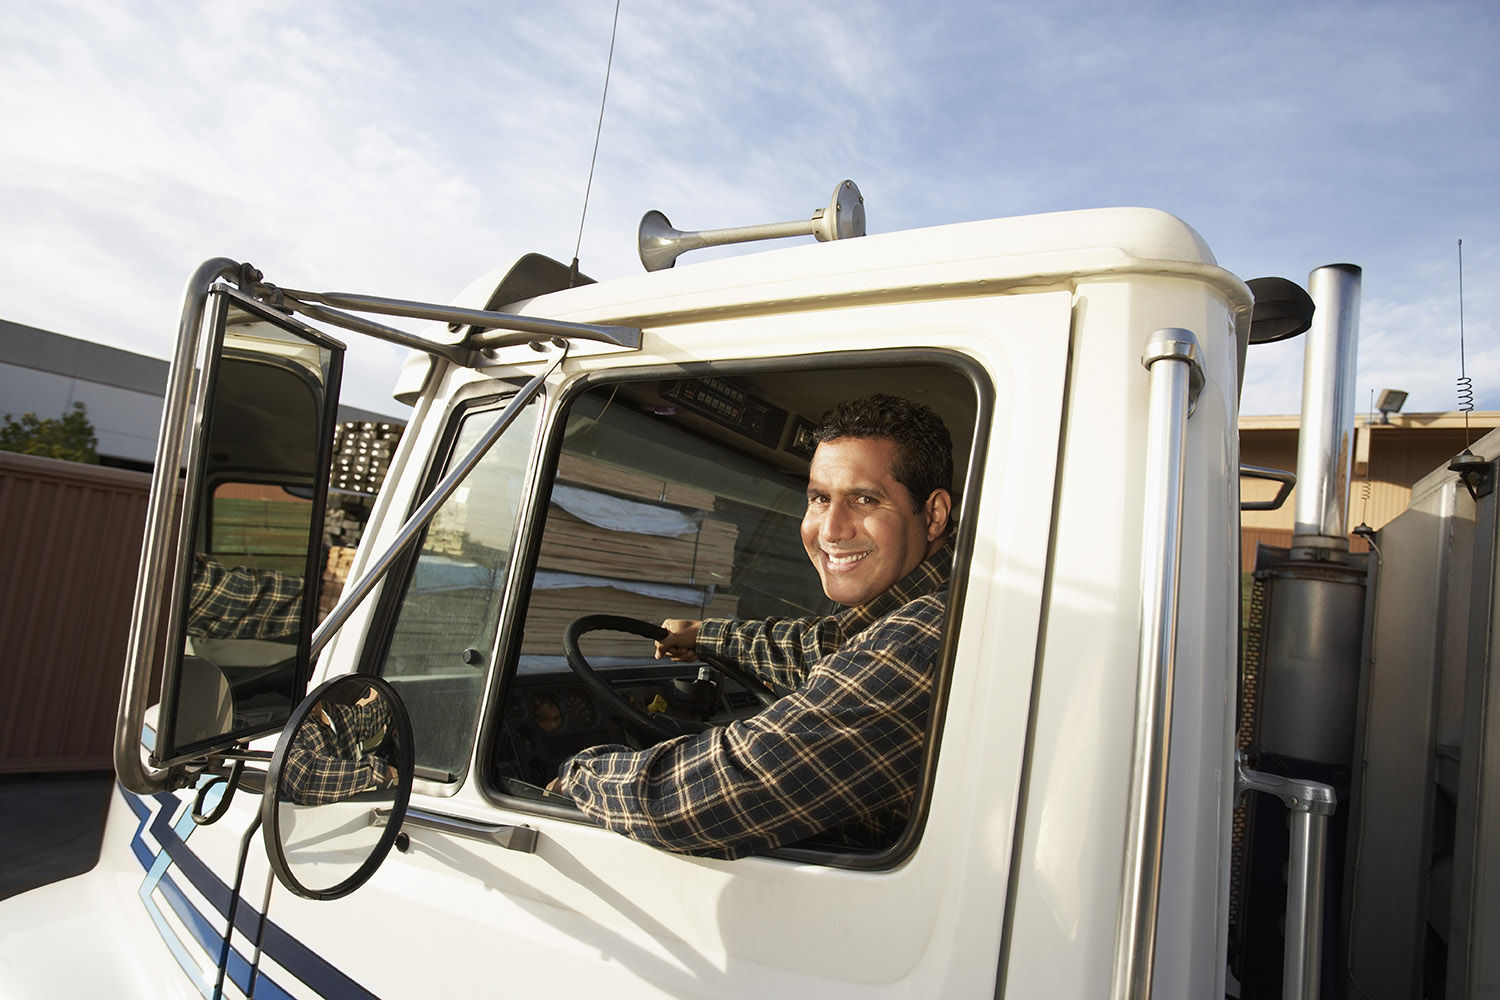 A smiling man inside the cab of a 16-wheeler truck